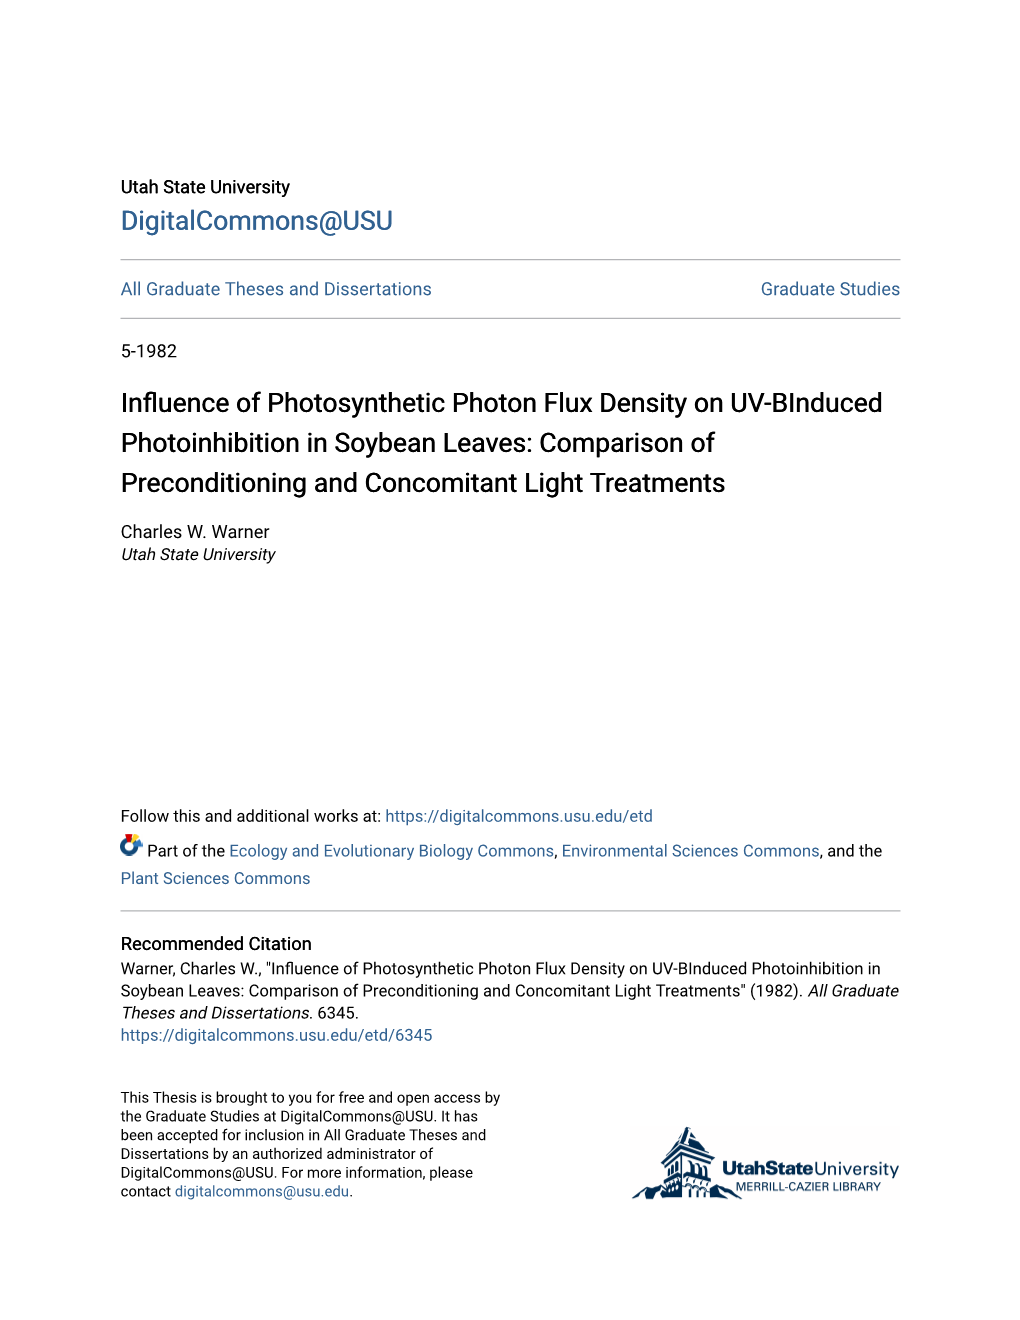 Influence of Photosynthetic Photon Flux Density on UV-Binduced Photoinhibition in Soybean Leaves: Comparison of Preconditioning and Concomitant Light Treatments